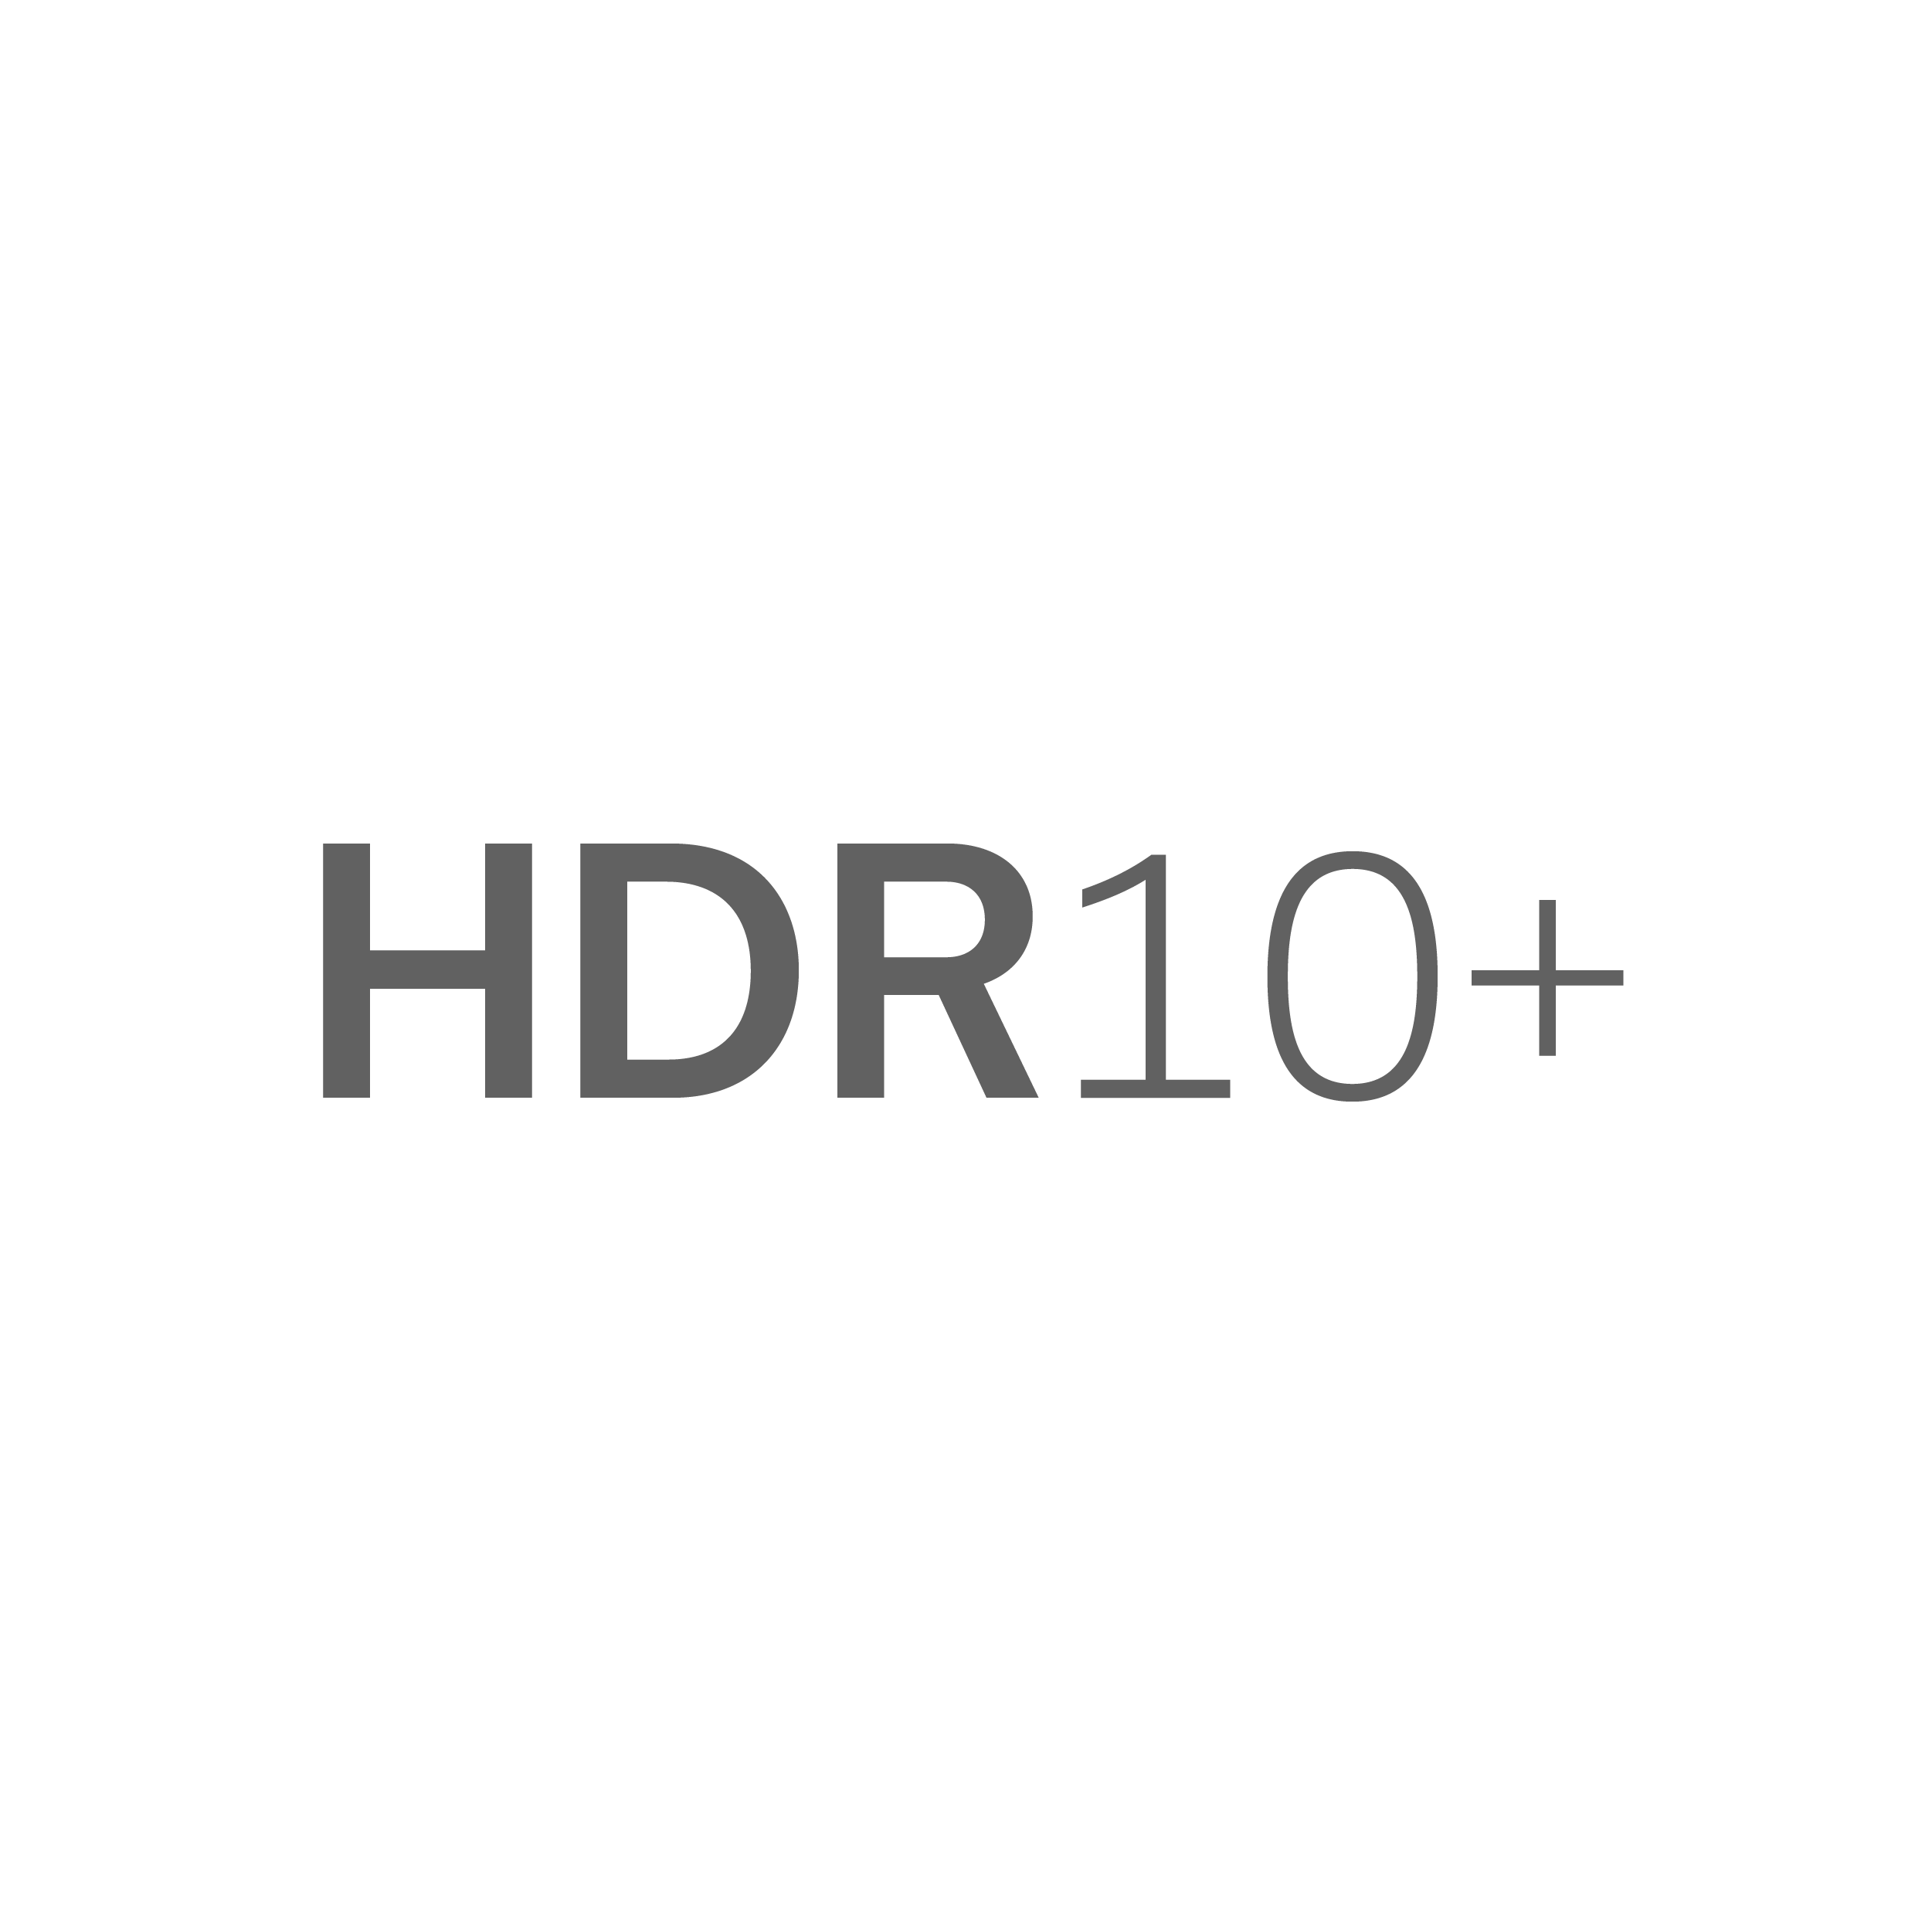 Go to "HDR10+"